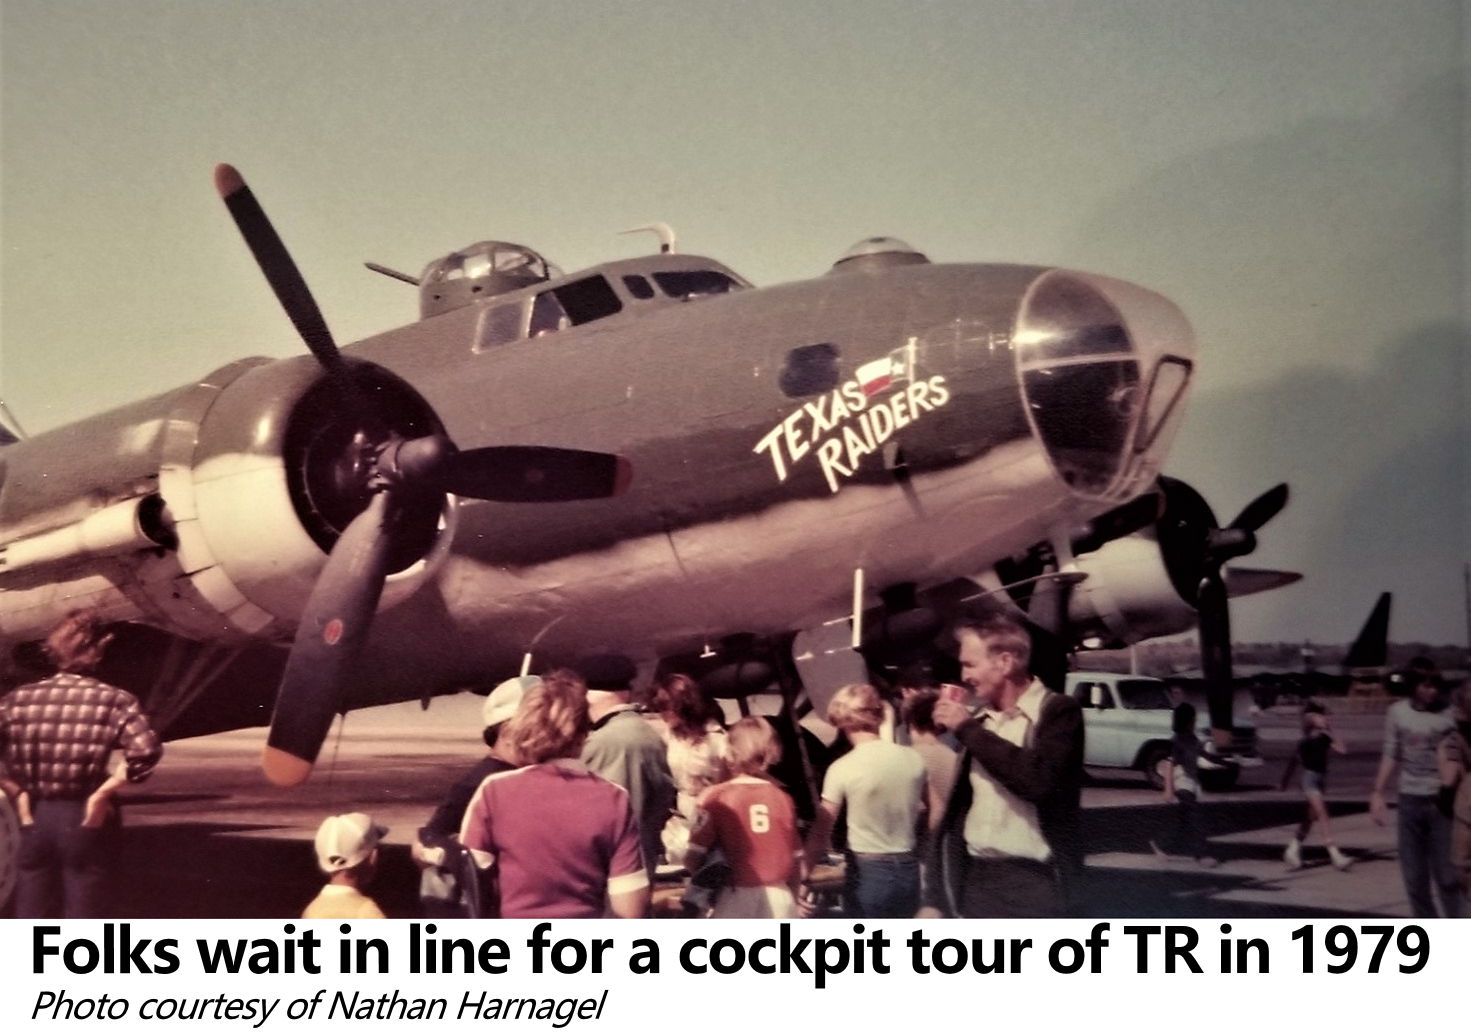 Excited Visitors Get Cockpit Tour of TR in 1979